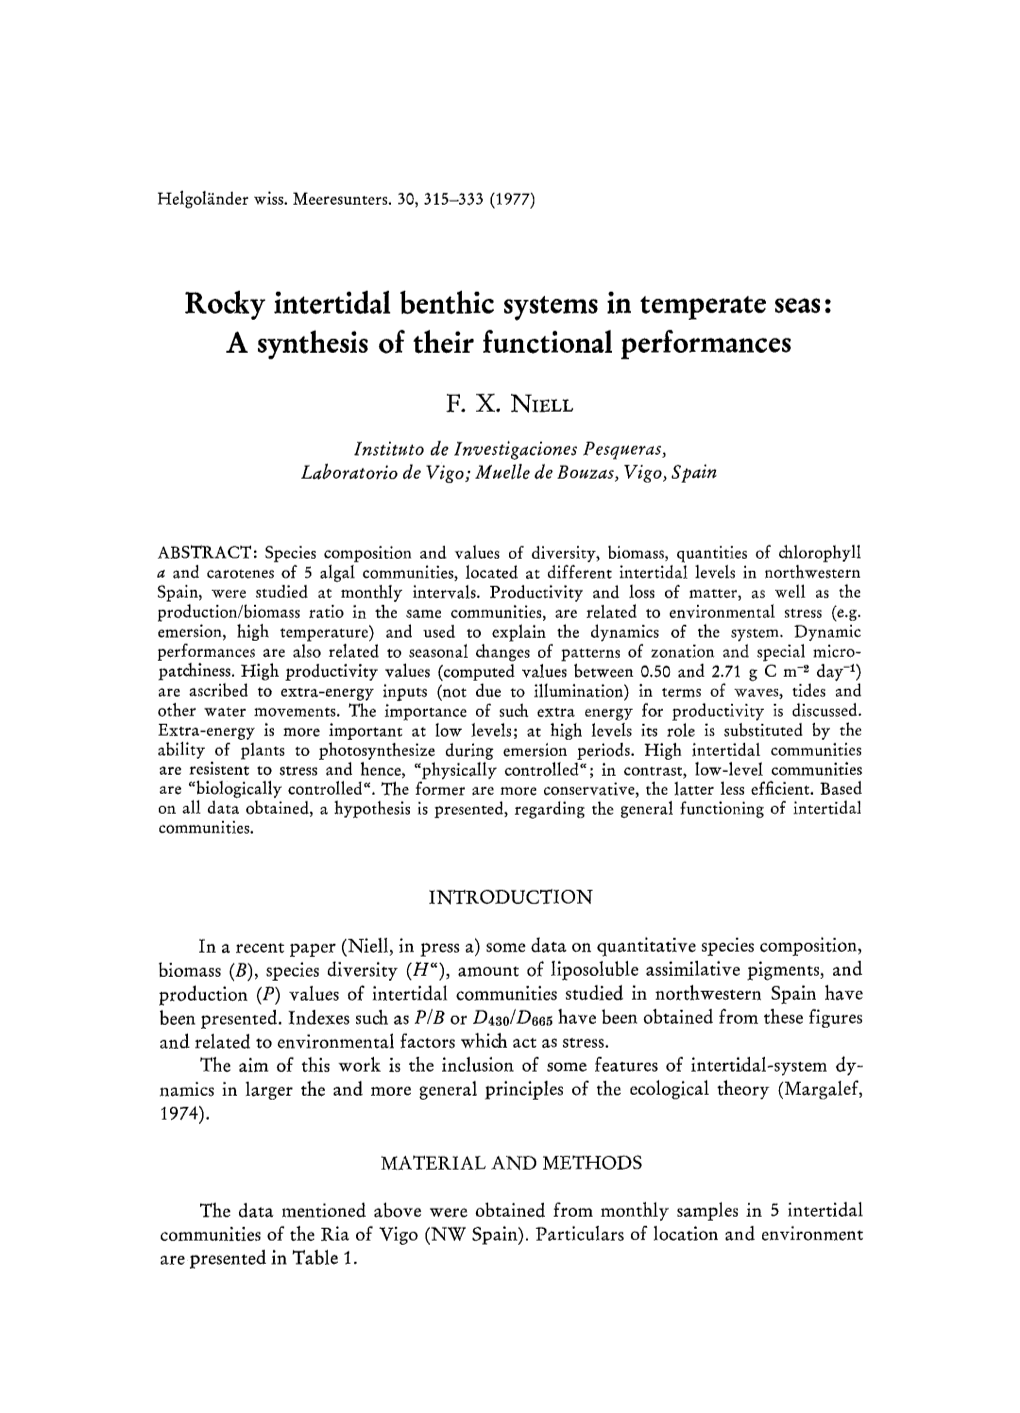 Rocky Intertidal Benthic Systems in Temperate Seas: a Synthesis of Their Functional Performances